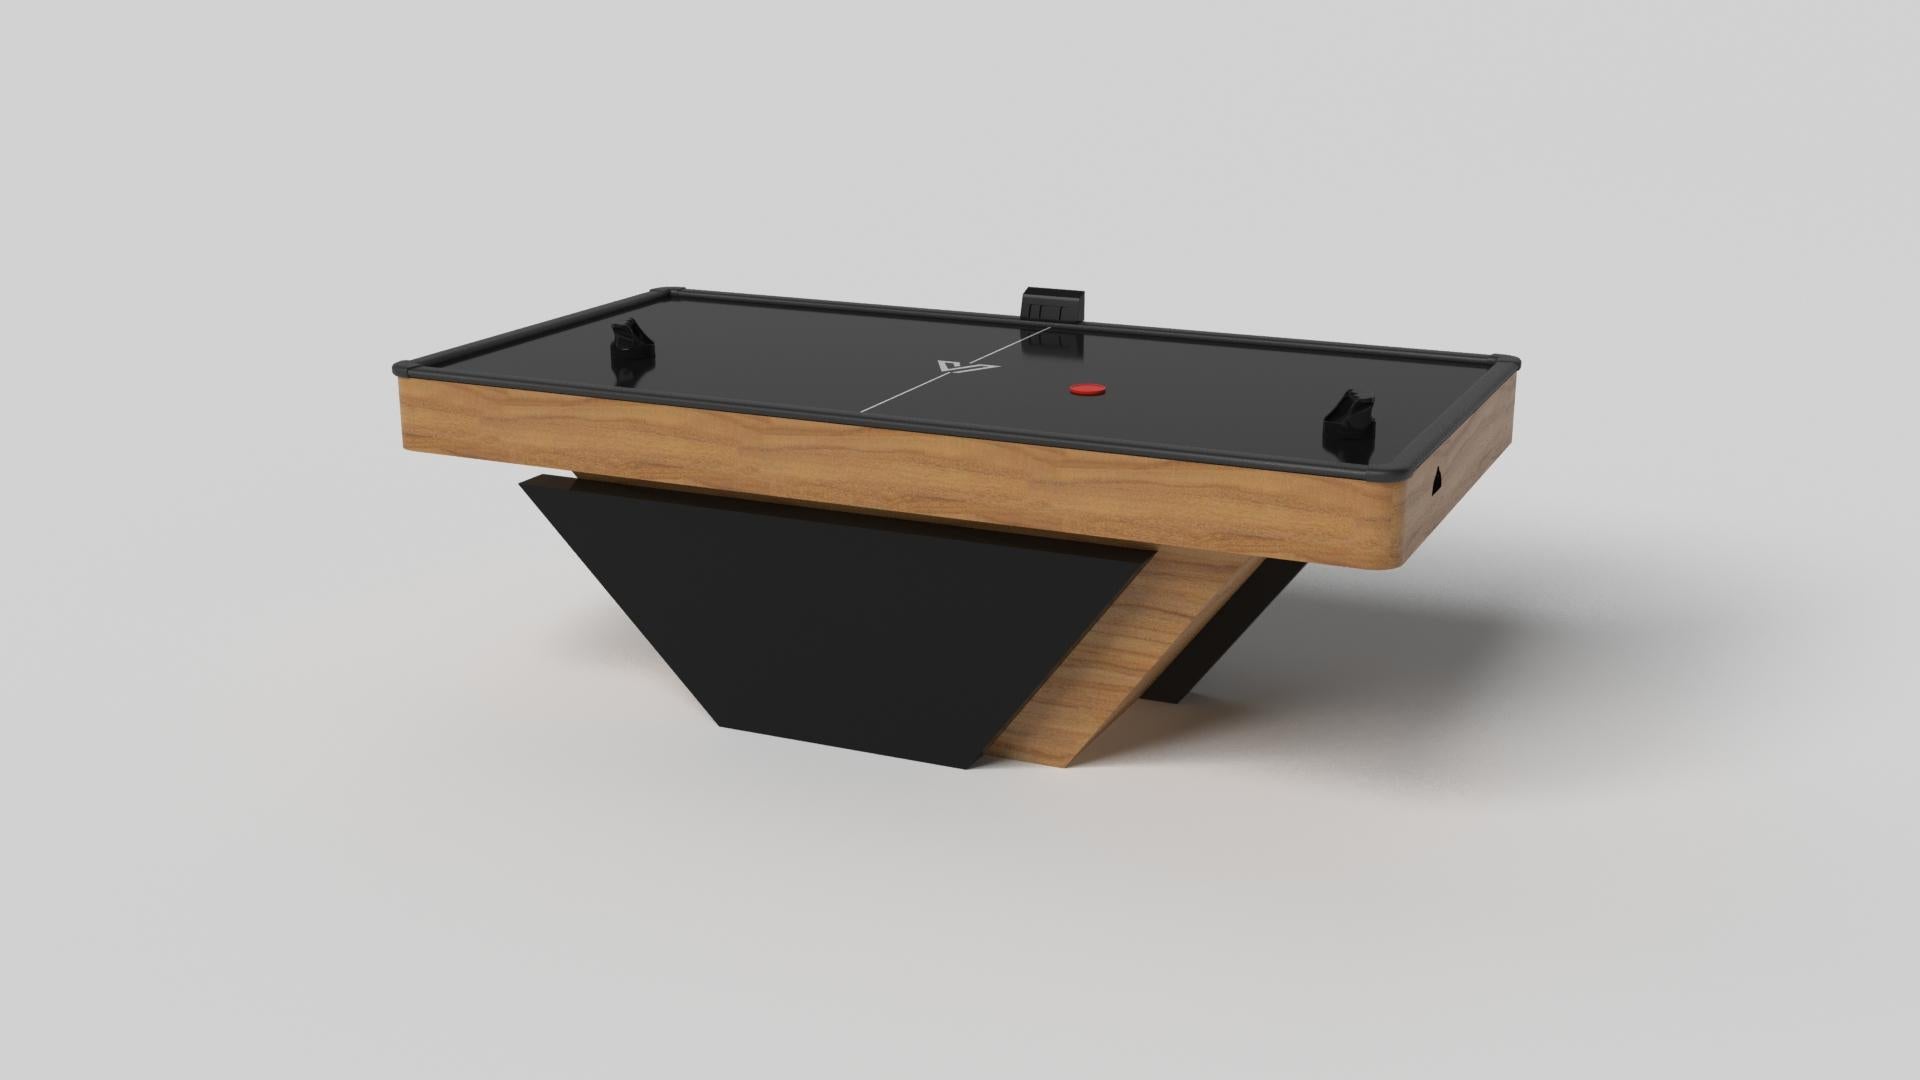 Handcrafted with clean lines, sharp angles, and a pyramid base, the Vogue air hockey table in chrome with black strikes the perfect balance between sport-inspired style and contemporary design. Timeless in its appeal and revered for its practicality